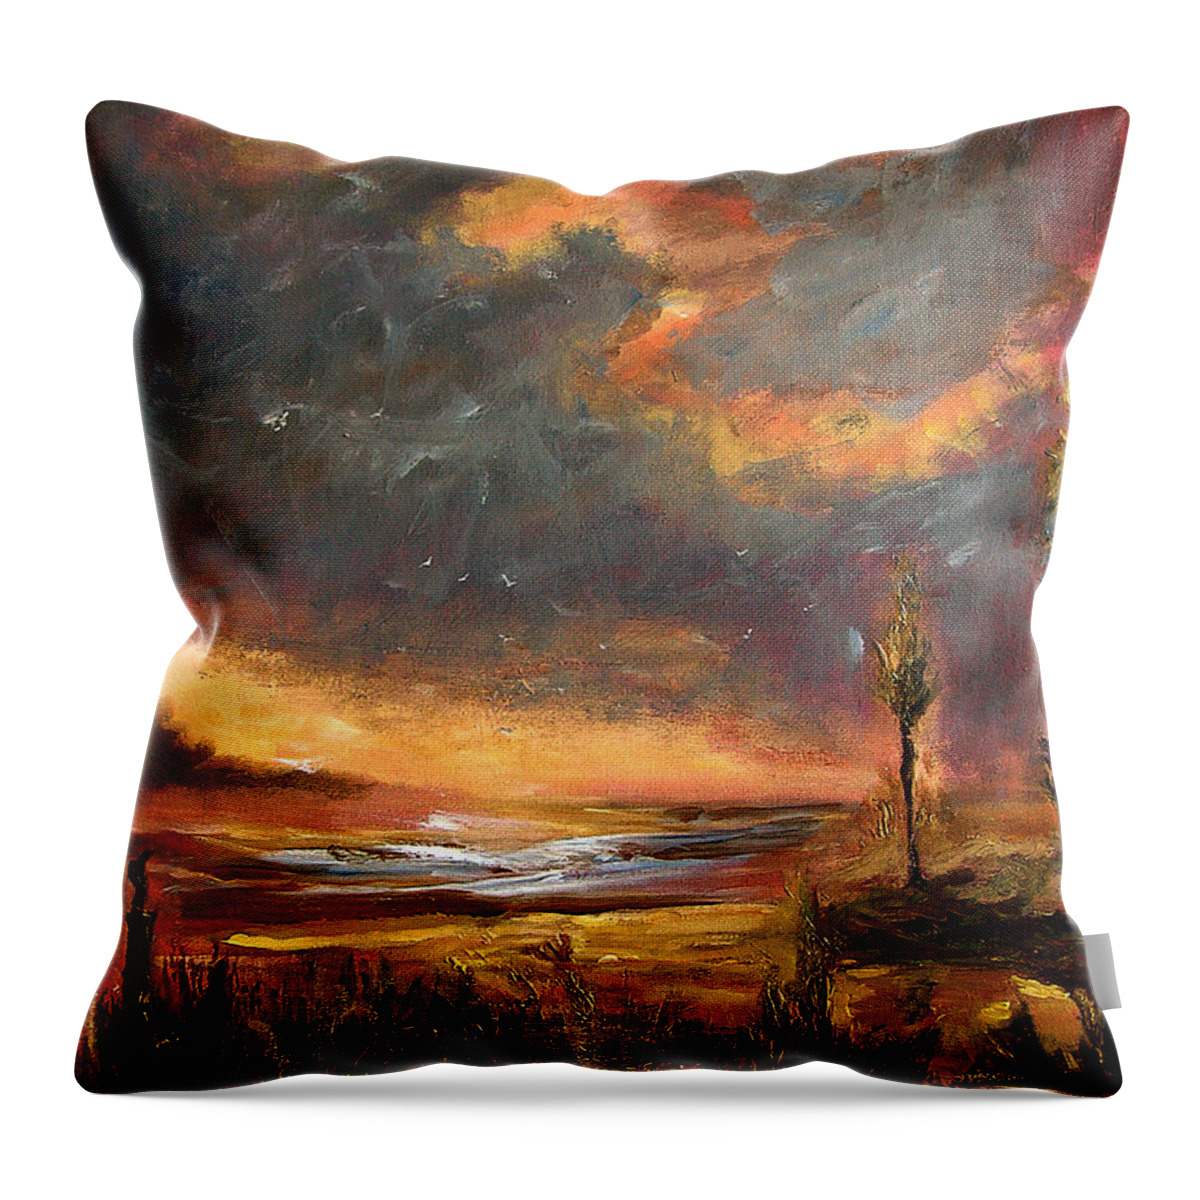 Original Throw Pillow featuring the painting Sunrise with birds by Julianne Felton